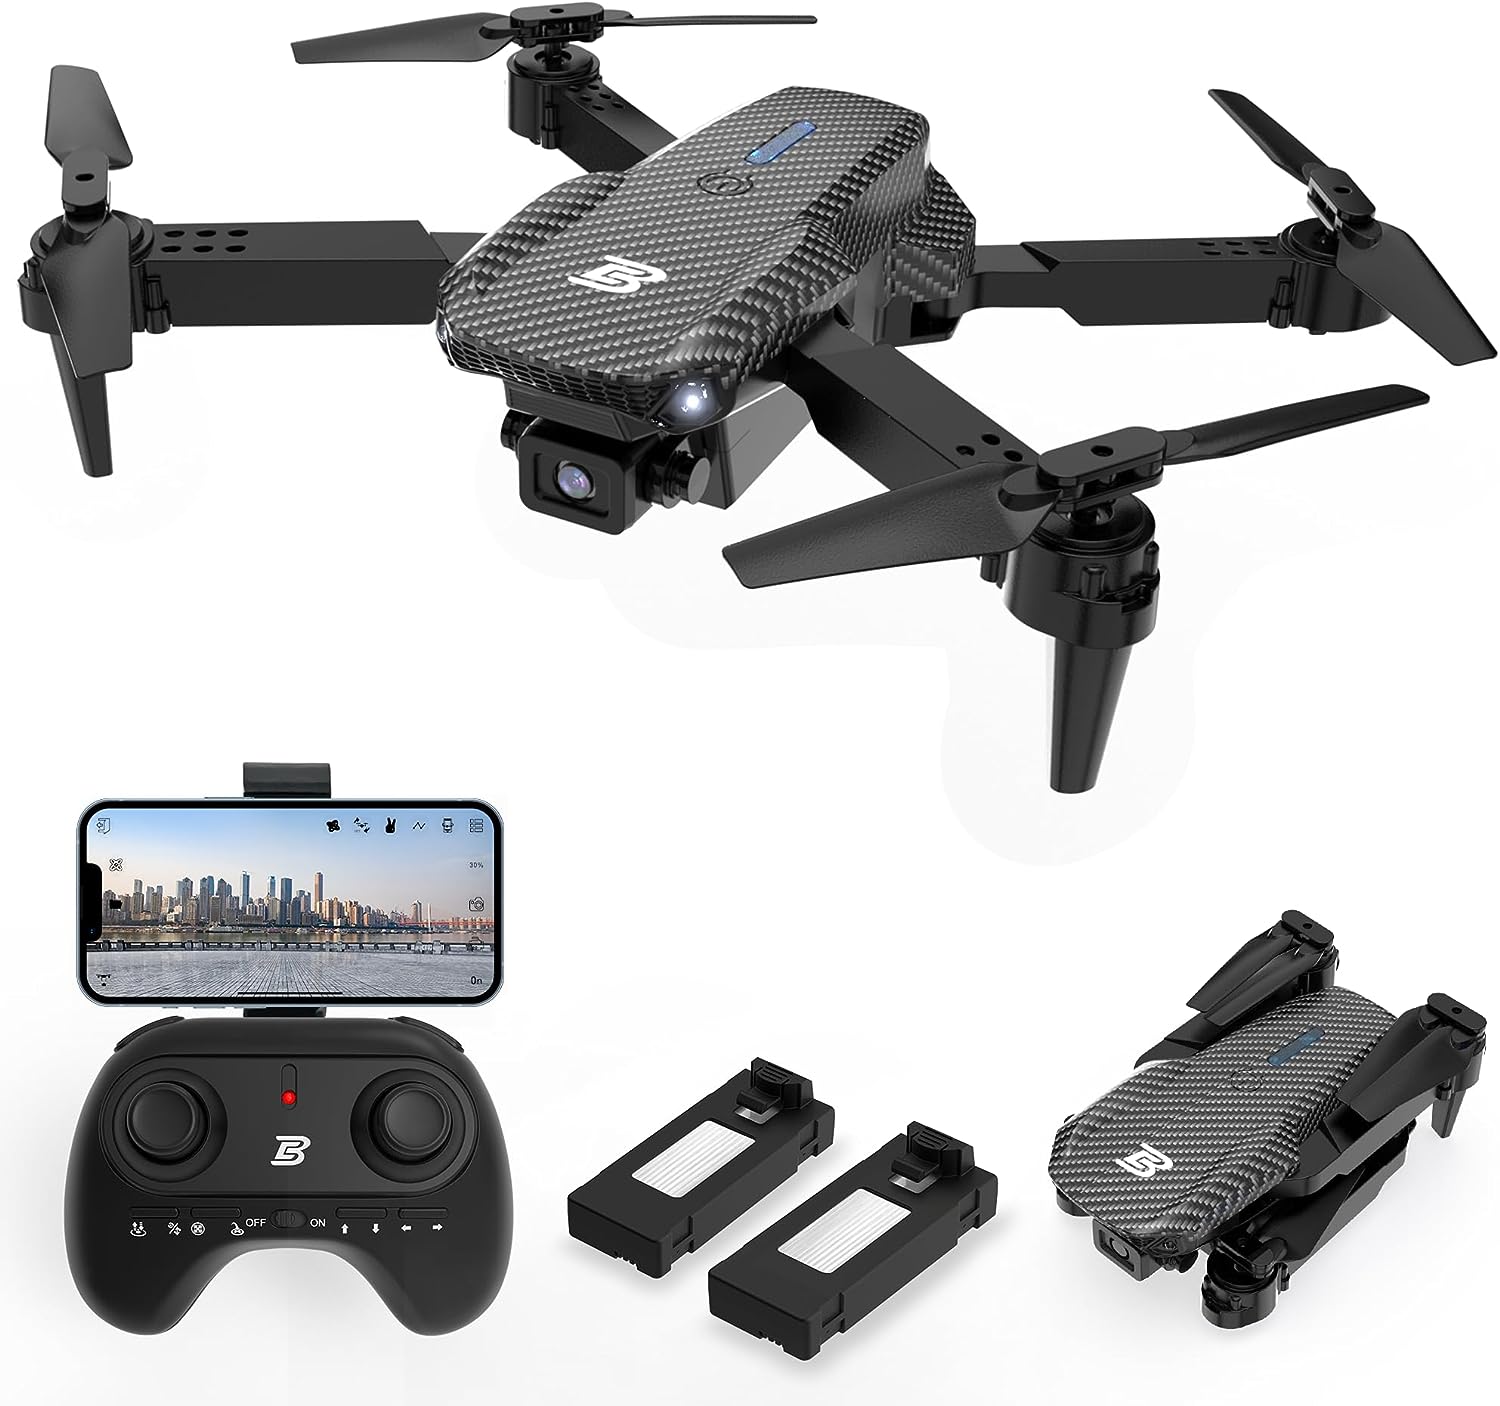 BEZGAR BD101 Drone with 1080P Camera for Adults and Kids – Foldable FPV Remote Control Drone with Gestures Selfie, Auto Hover, One Key Start/Land, 3D Flips, 2 Batteries, Toys Gifts for Boys Girls